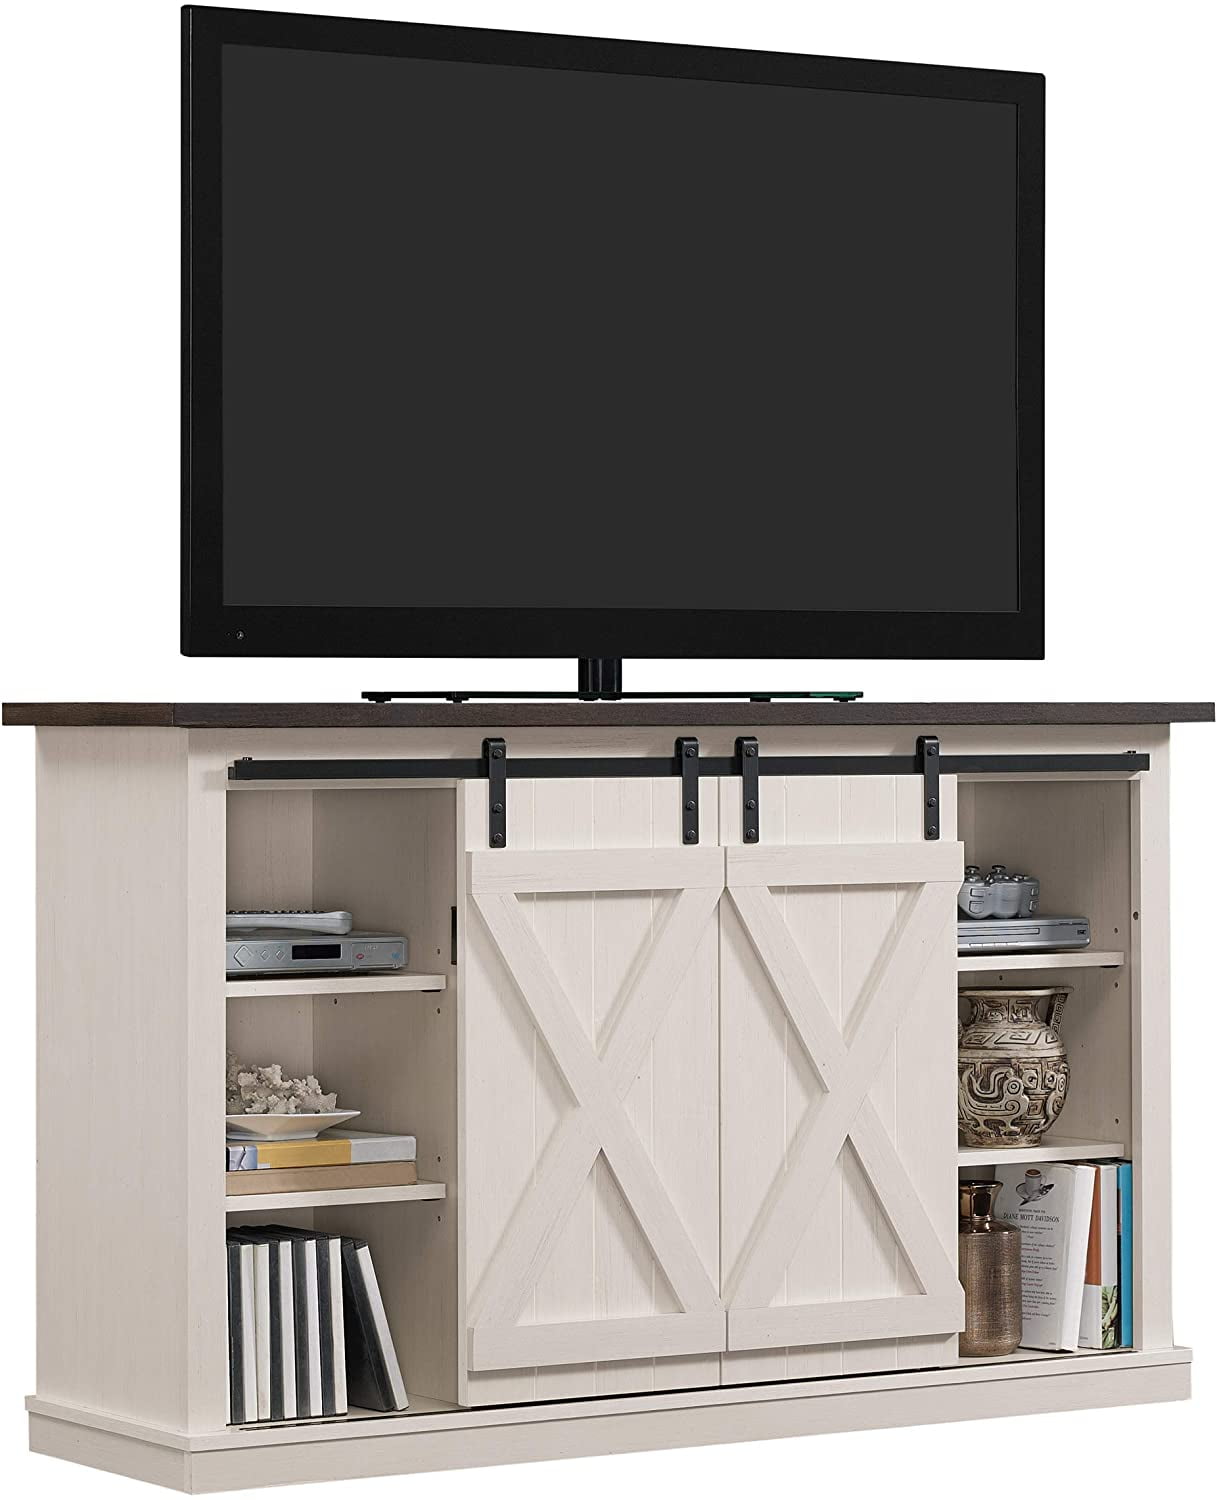 Laura James Black TV Stand Cabinet Unit Double Door with Storage and shelf